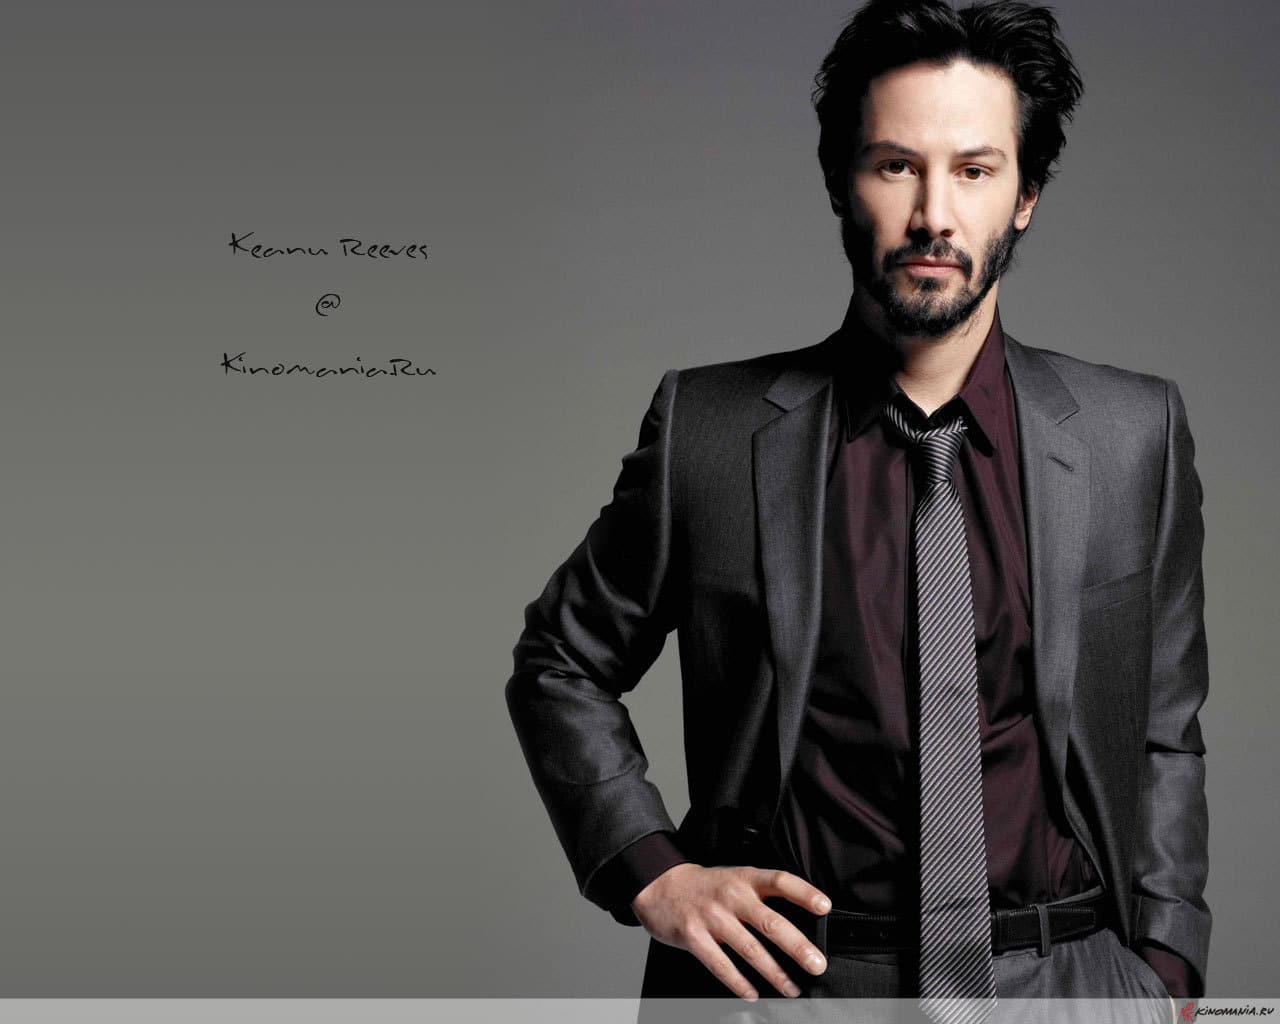 Keanu Reeves Should Be Named 2019 Time’s Person of the Year; demands Fan Petition